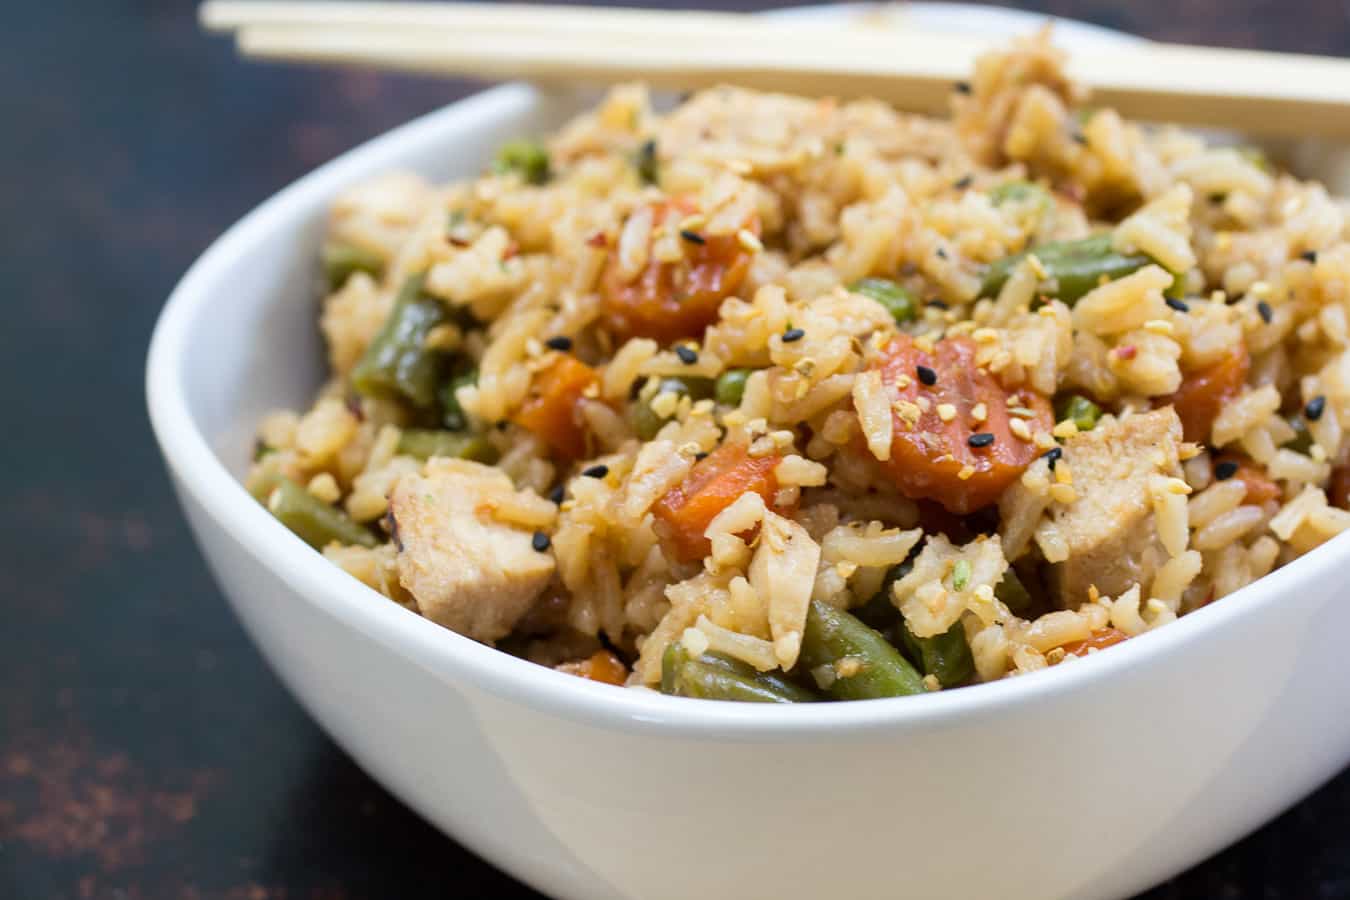 Teriyaki Chicken Rice Bowl - Easy dinner idea that is quick and delicious!